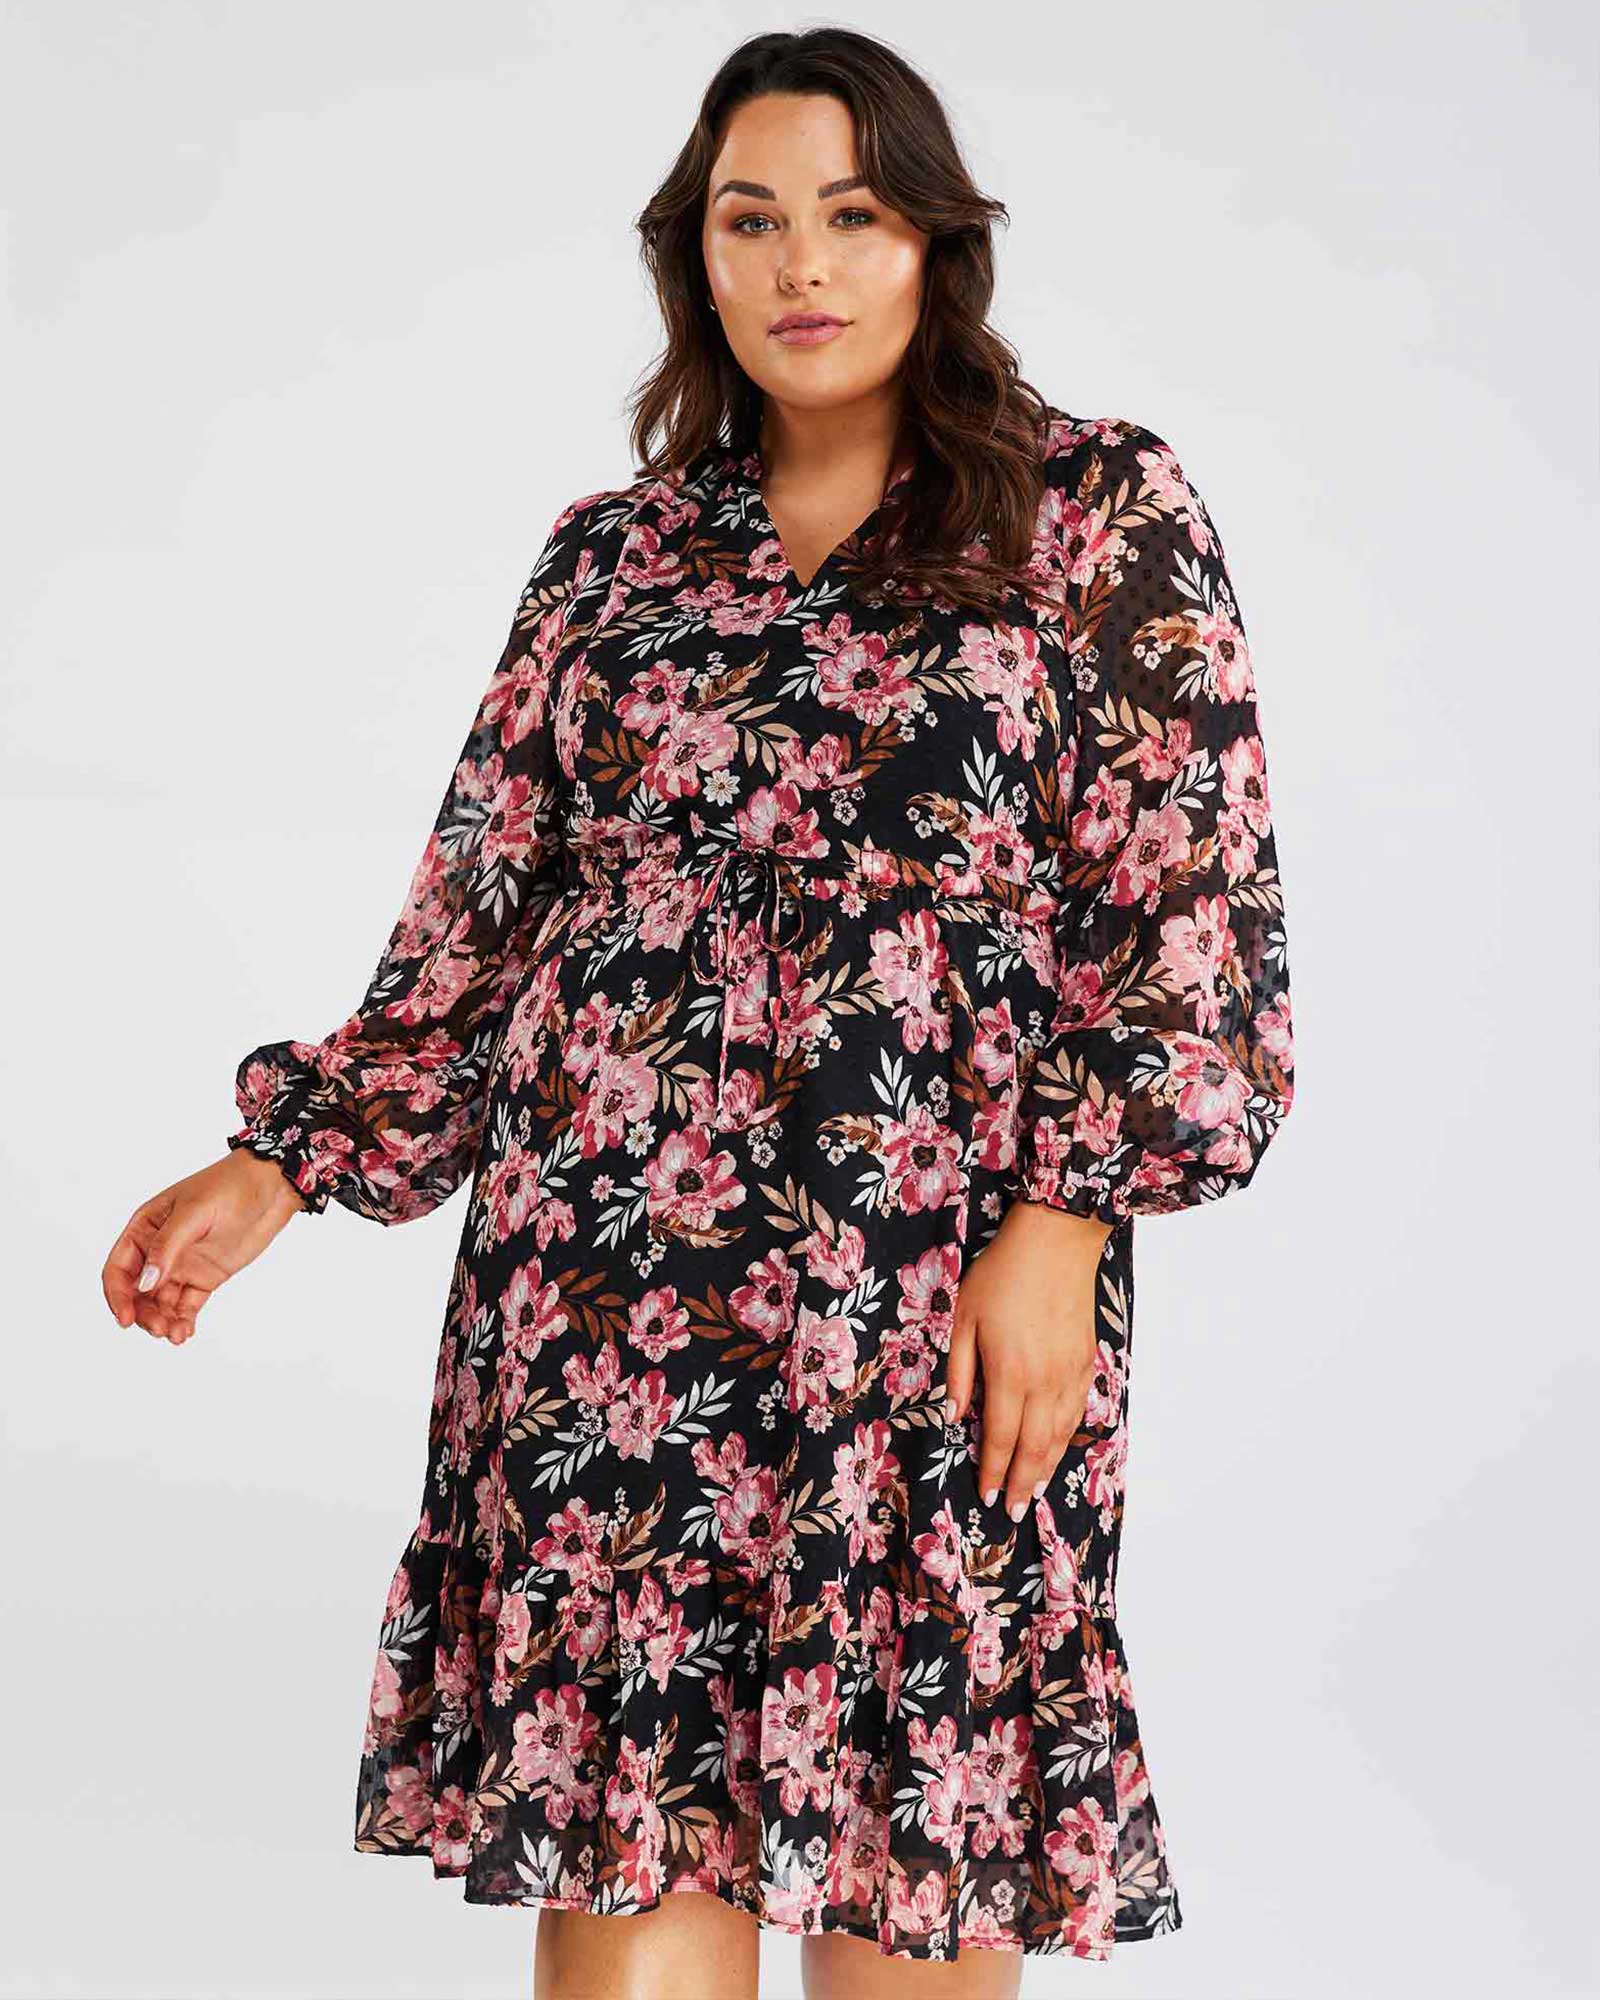 A Woodland Floral plus size woman wearing a Woodland Floral Textured Mini Dress.